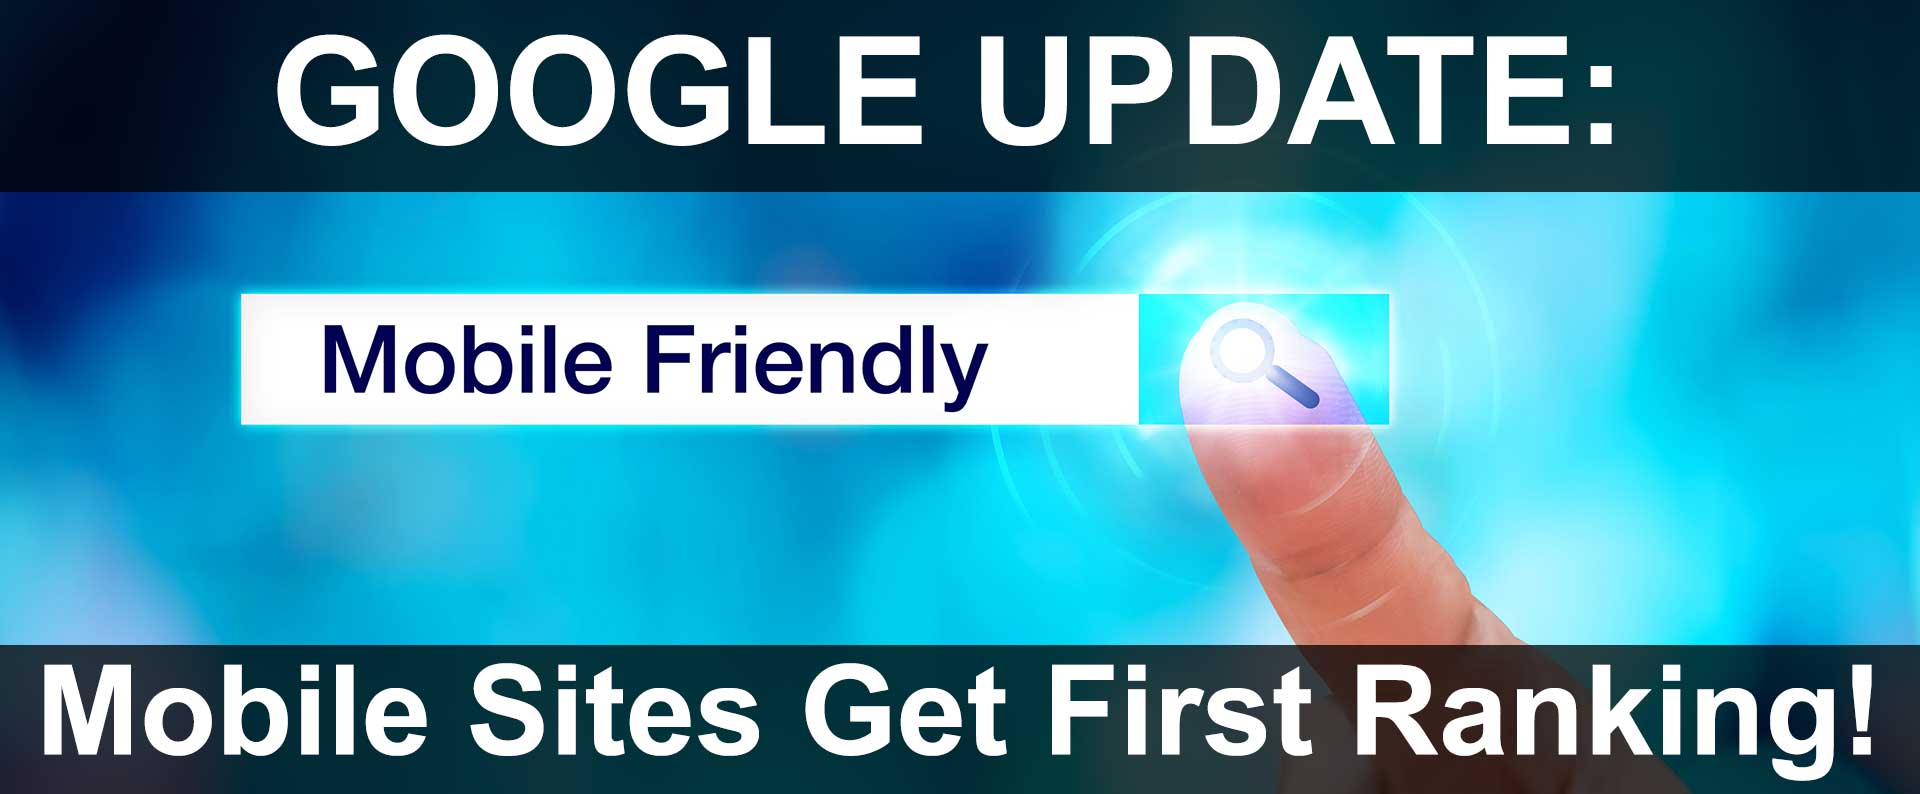 Google Ranks Mobile-Friendly Websites First In Search Results